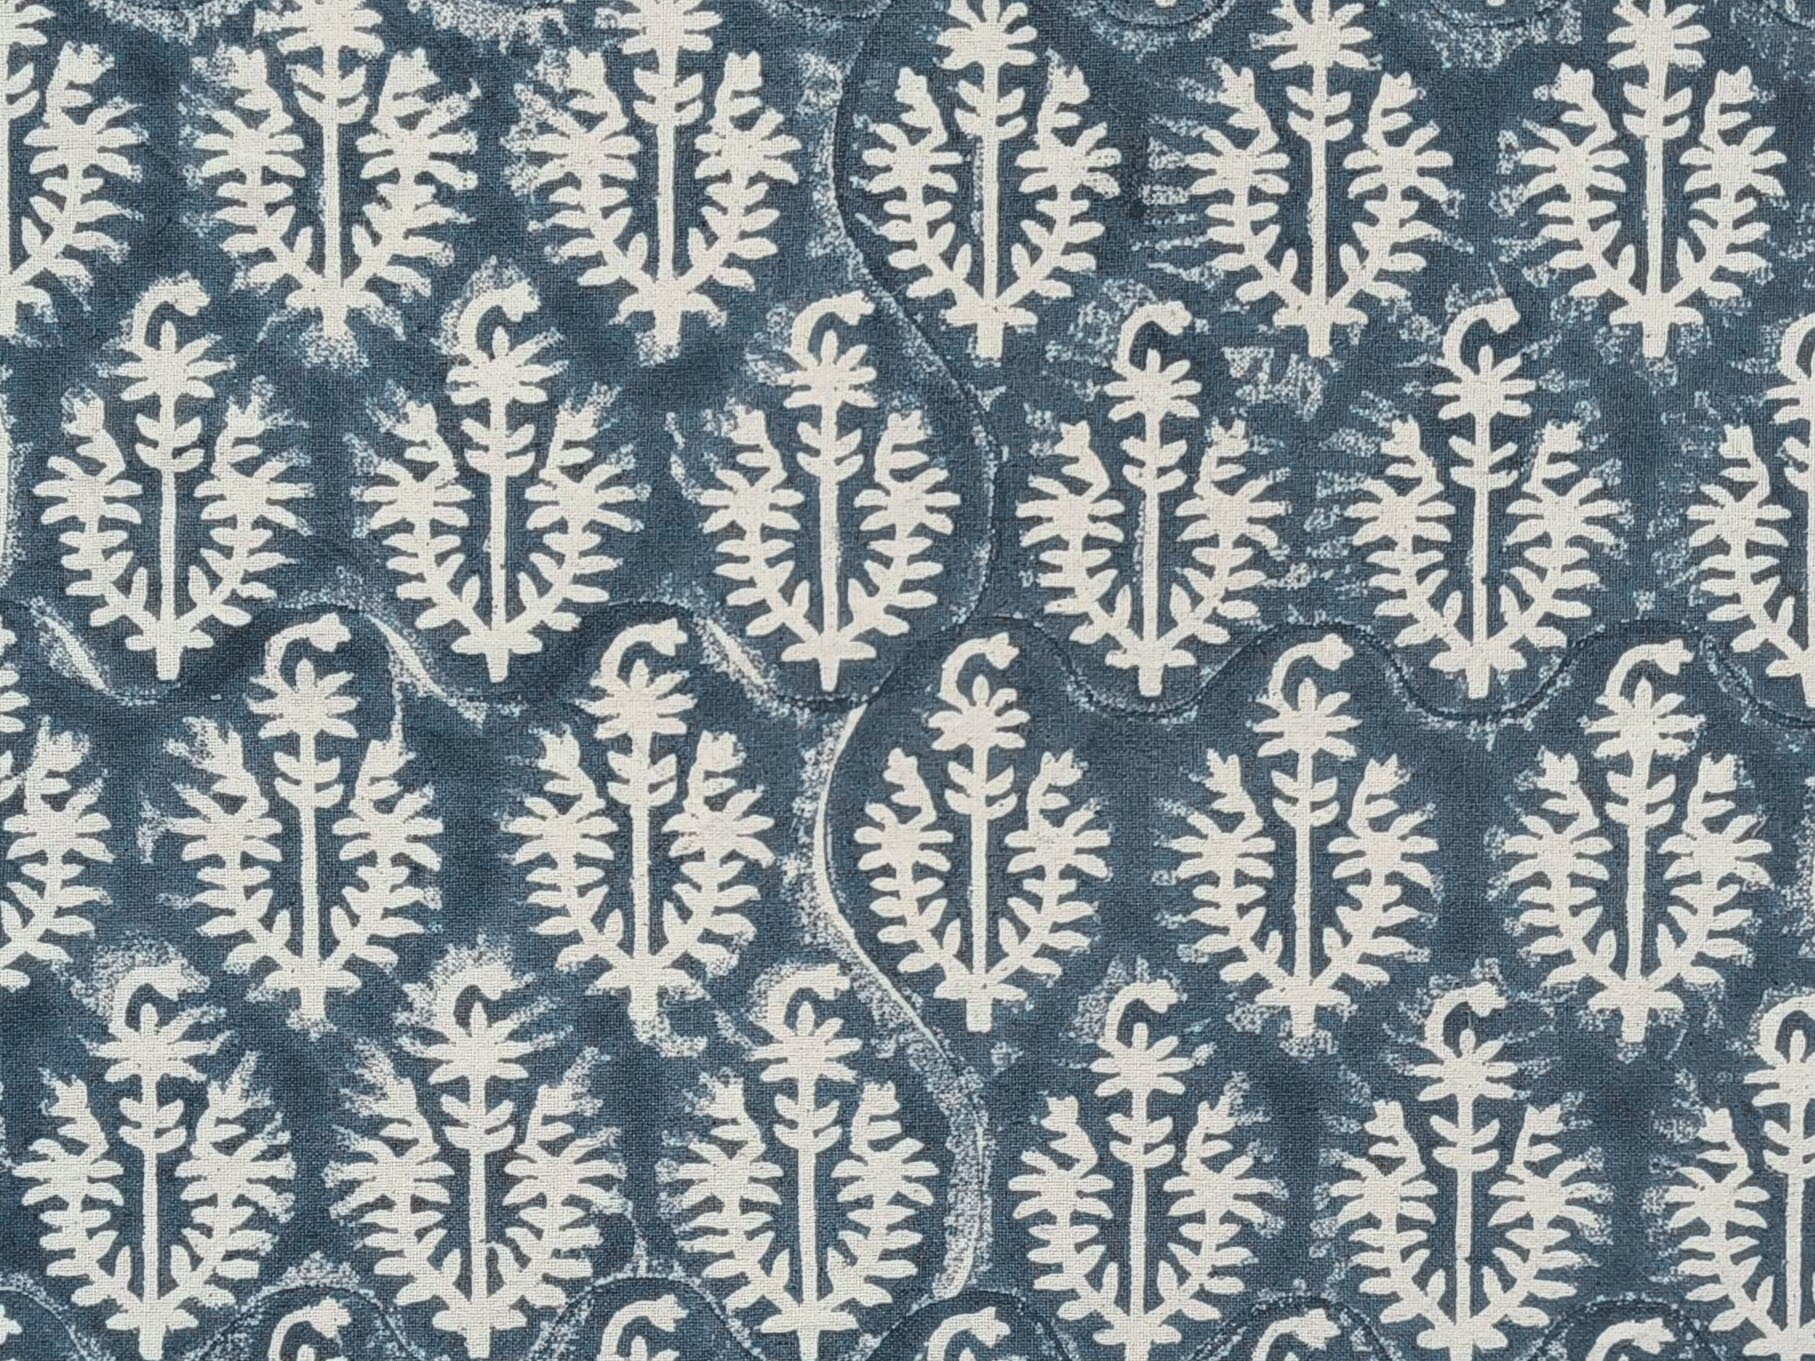 Block Print Linen Fabric, Neel Gagan  Hand Block Print Fabric  By The Yard  Floral Pattern Art  Home Decor Fabric  Linen Upholstery  Cushion Cover Fabric.